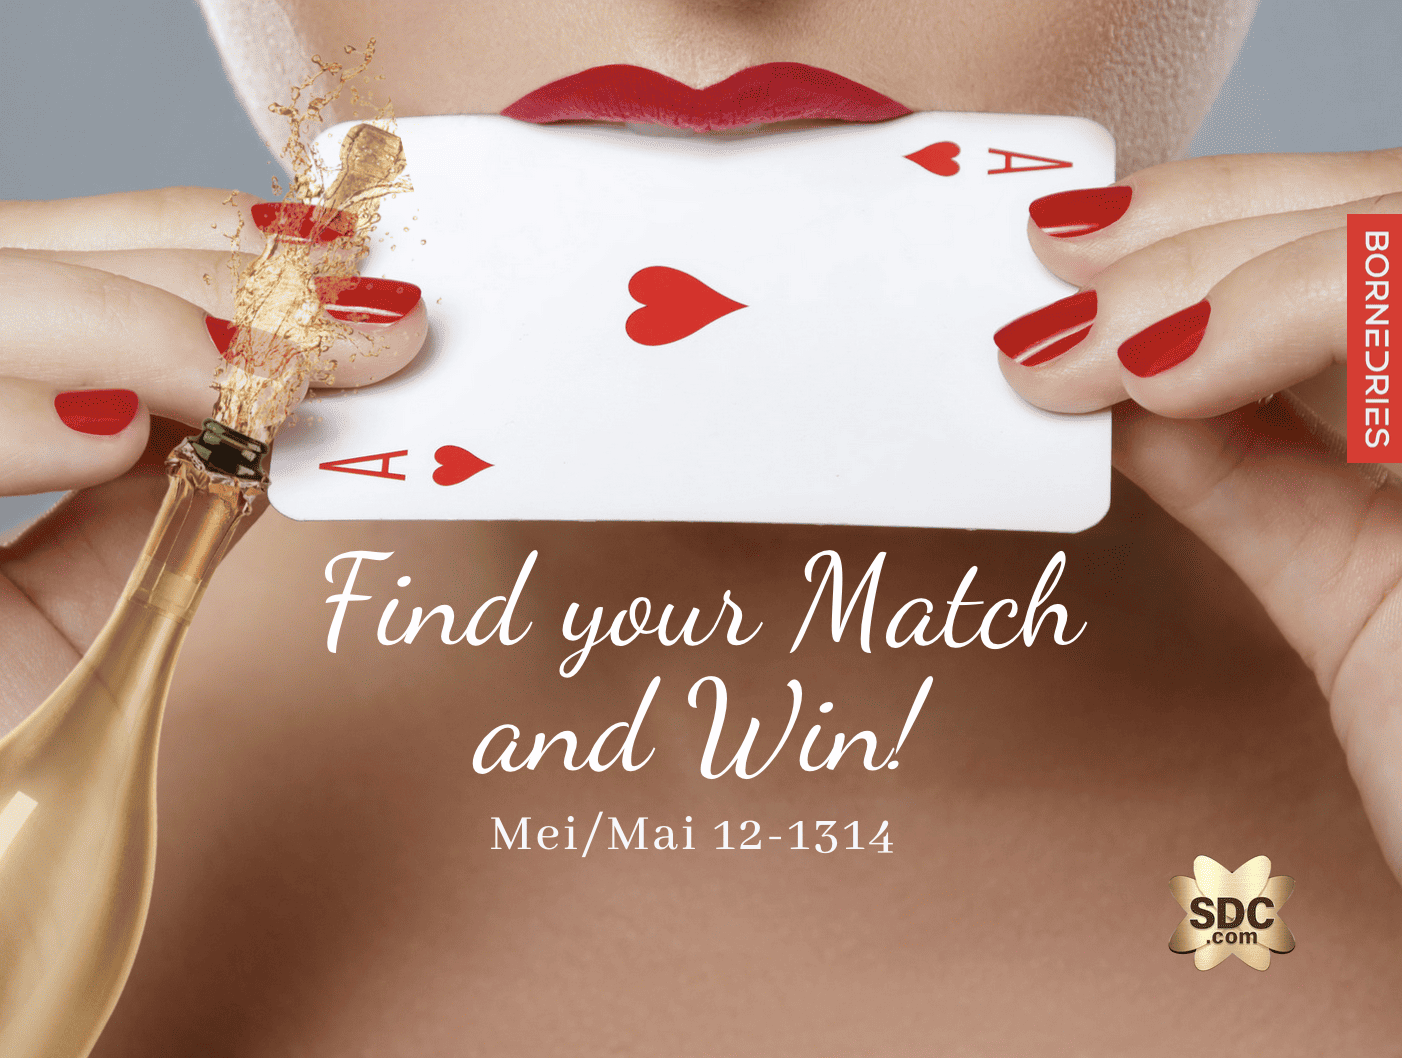 Find Your Match-Parenclub Bornedries Events